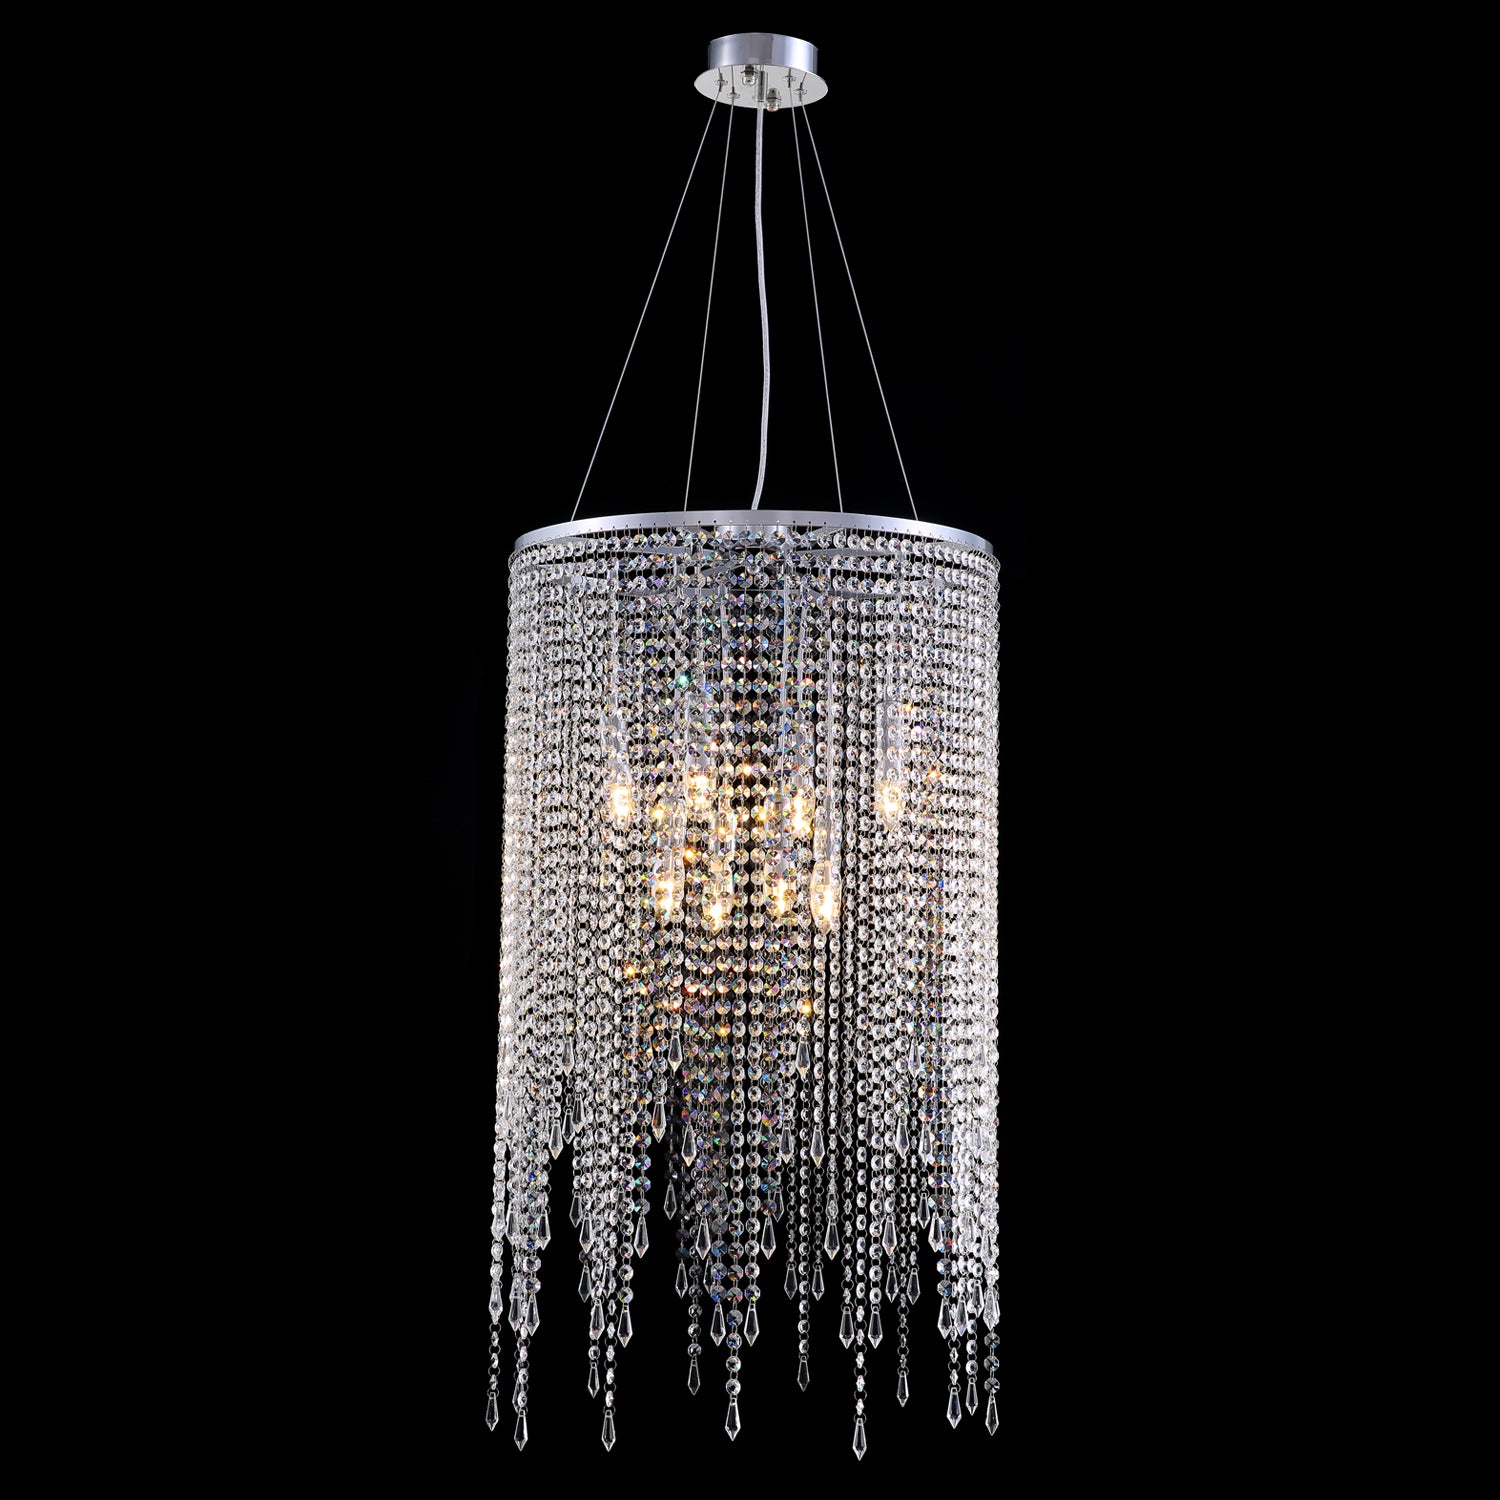 Luxury Linear Round Contemporary Island Crystal Chandelier With Warm Light